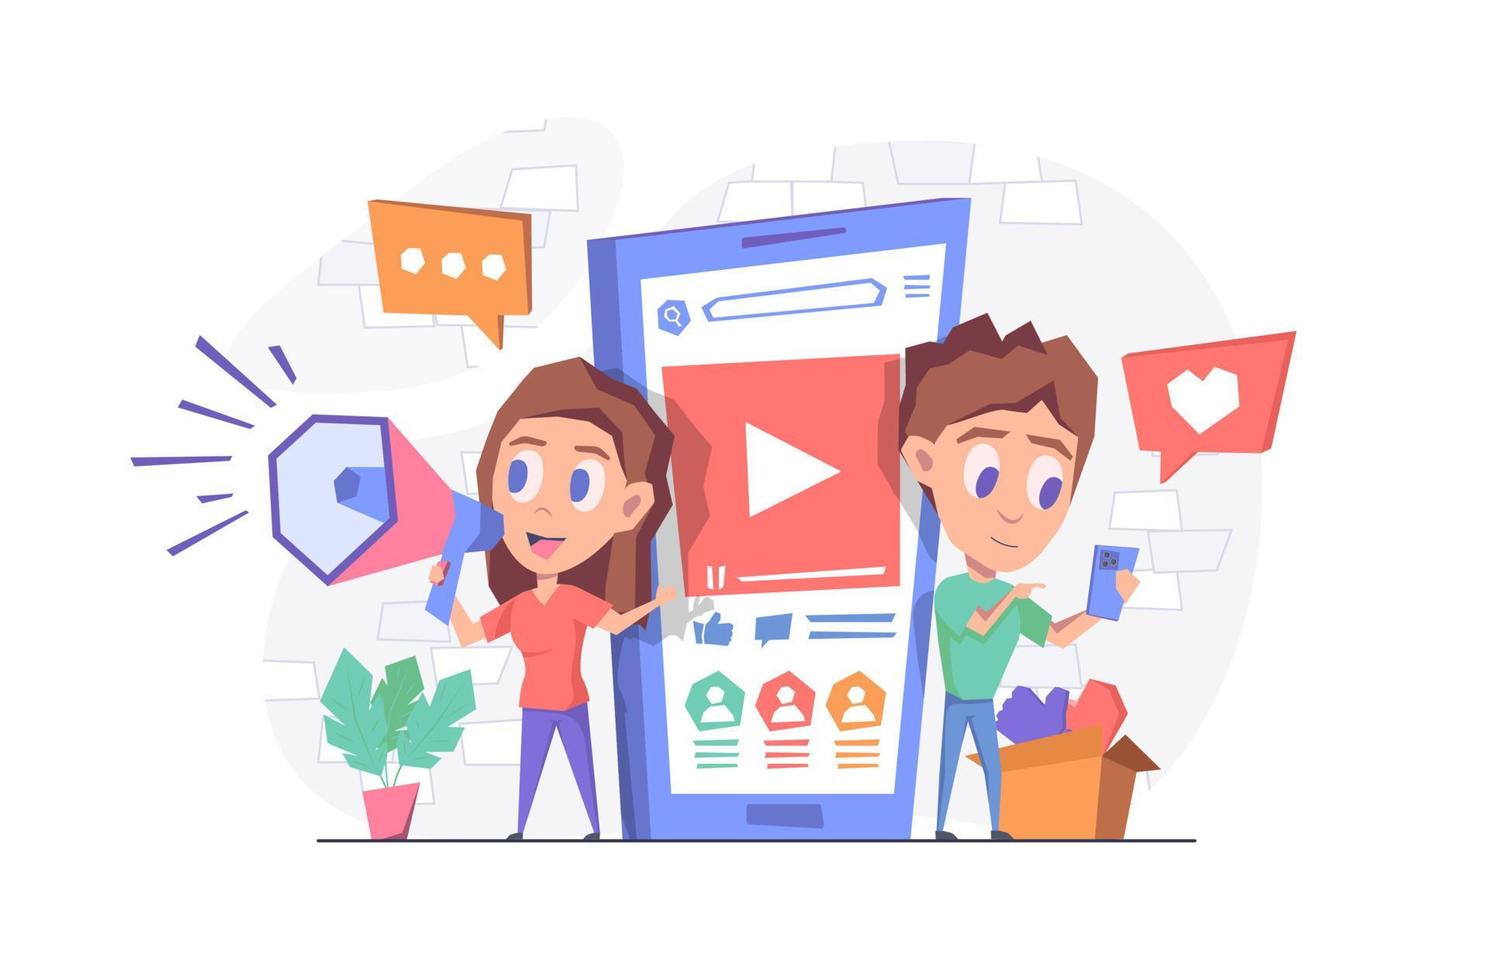 Social media marketing. A woman with a horn stands by the phone. A man is holding a smartphone, watching a video, giving likes. Flat vector illustration.